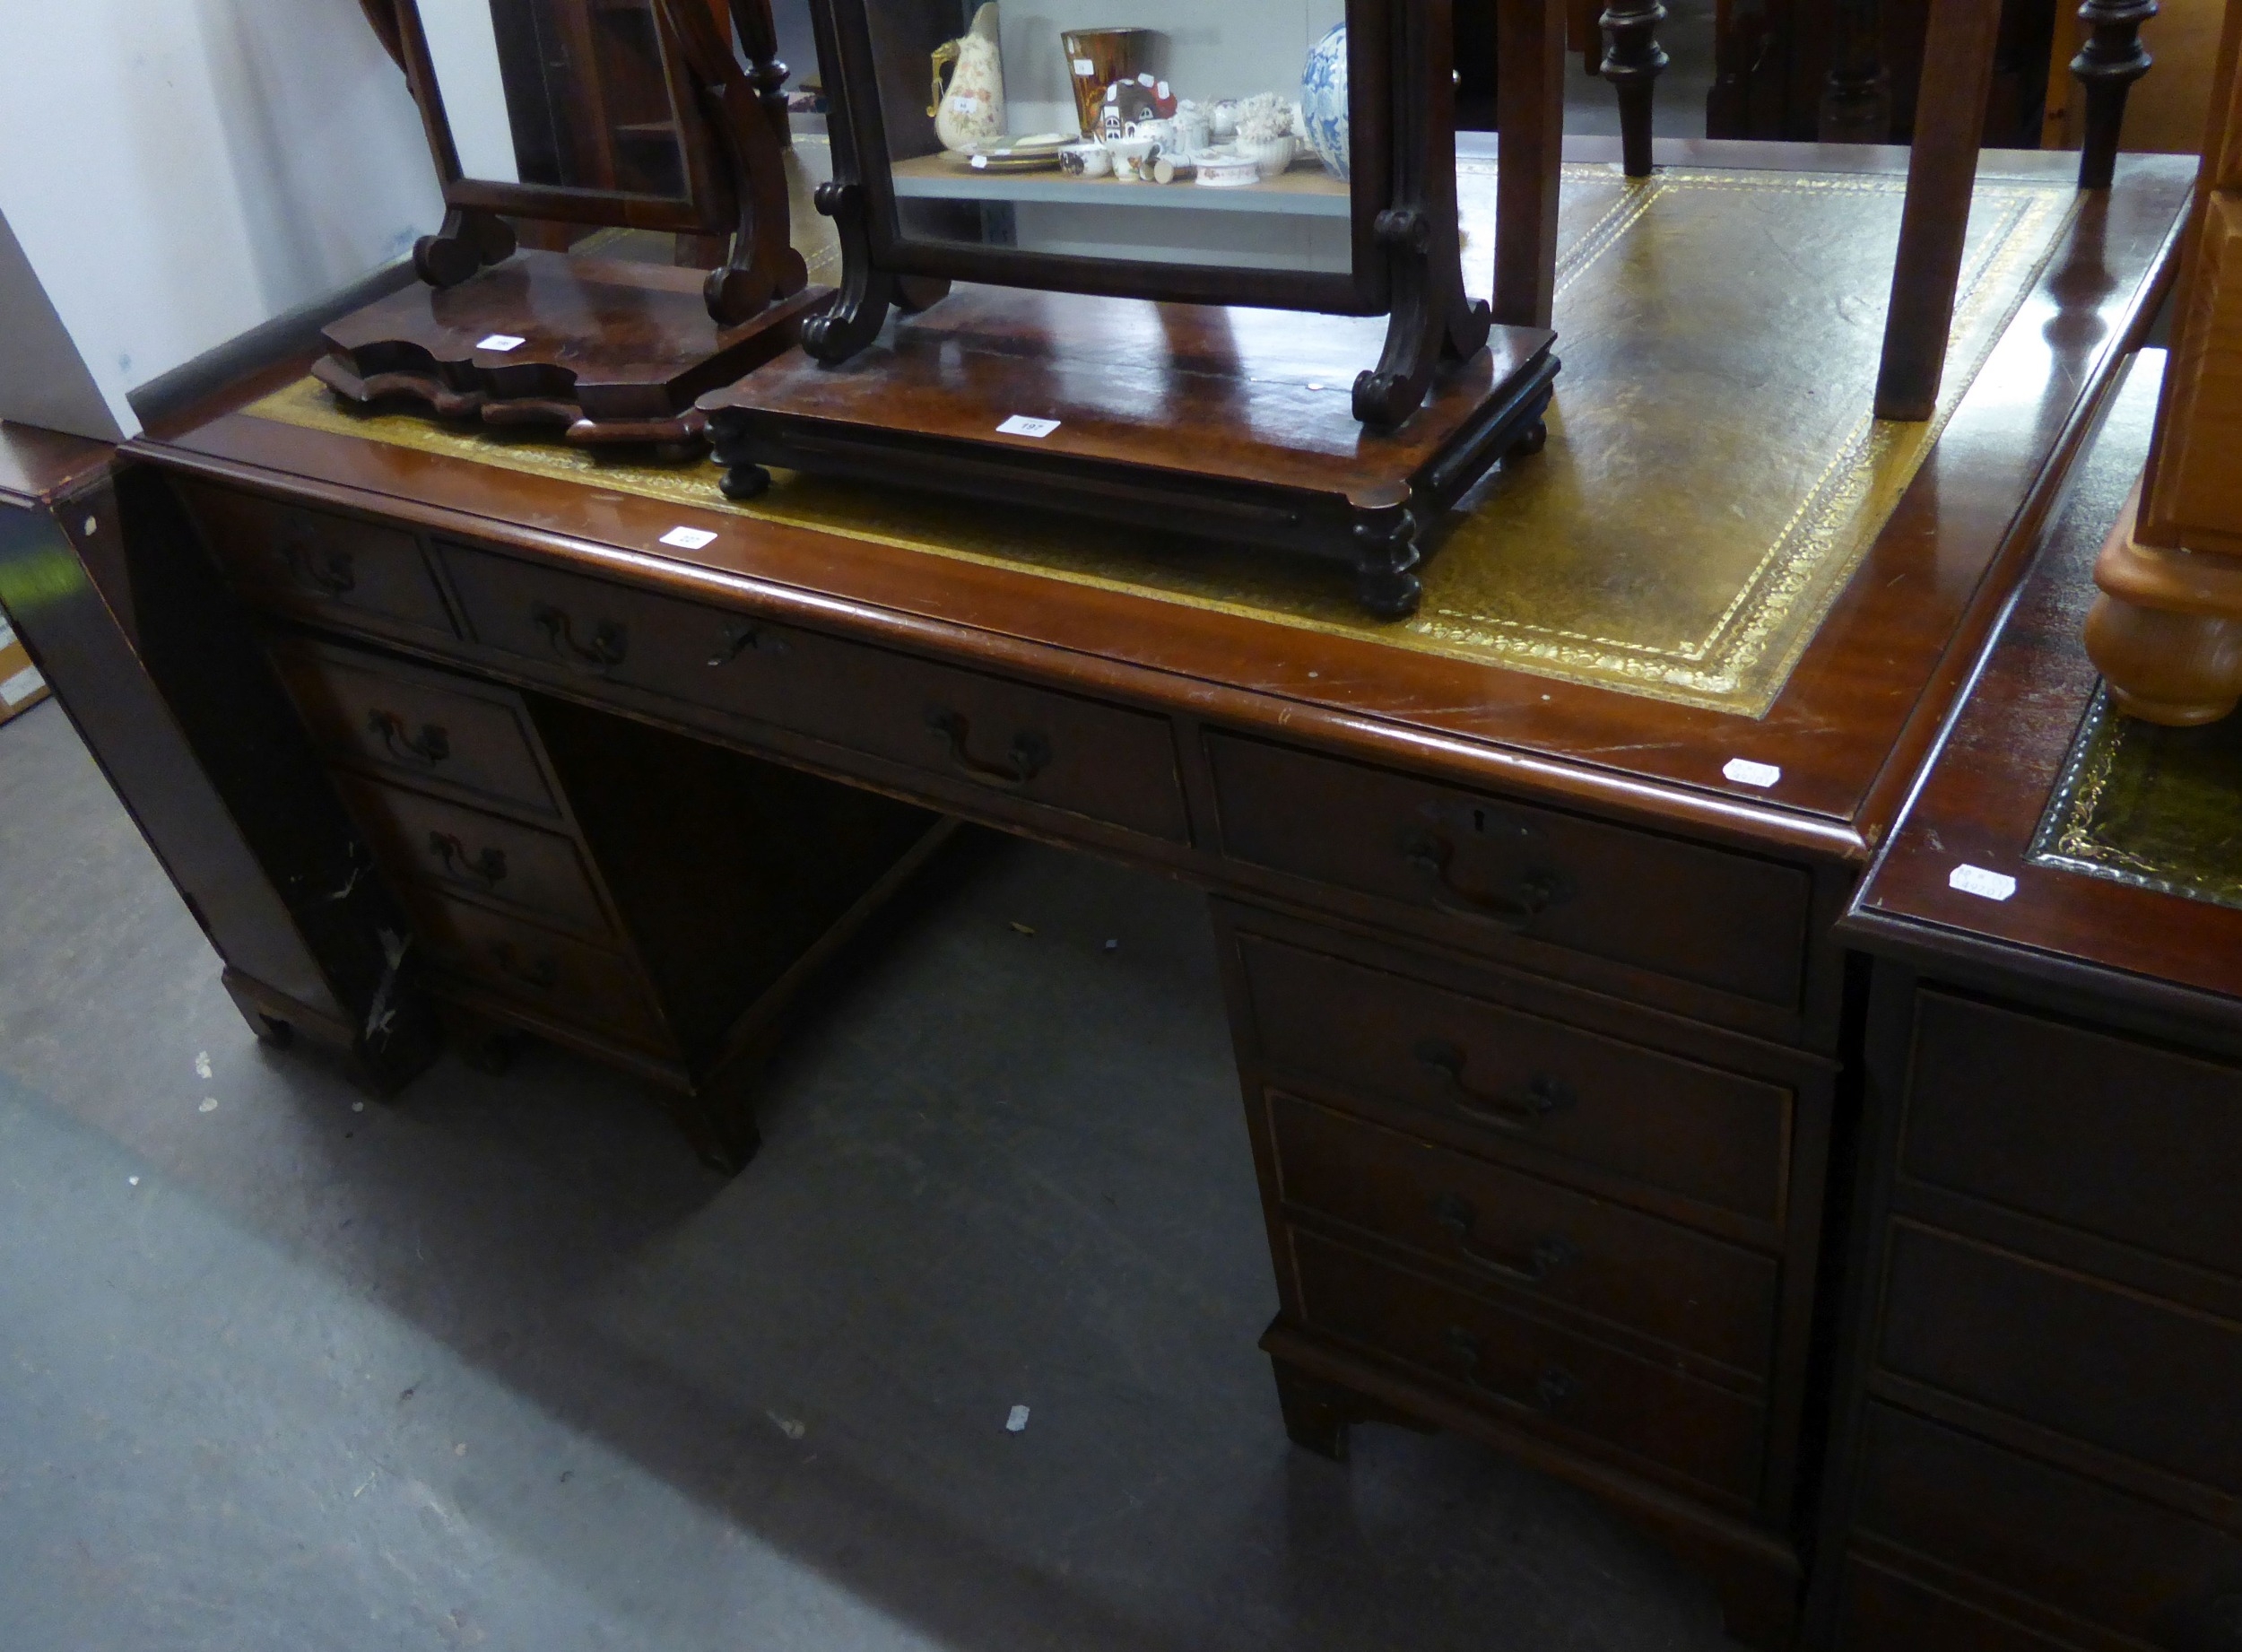 A LARGE REPRODUCTION TWIN PEDESTAL DESK, EACH PEDESTAL HAVING 3 DRAWERS, THE TOP HAVING ONE LONG